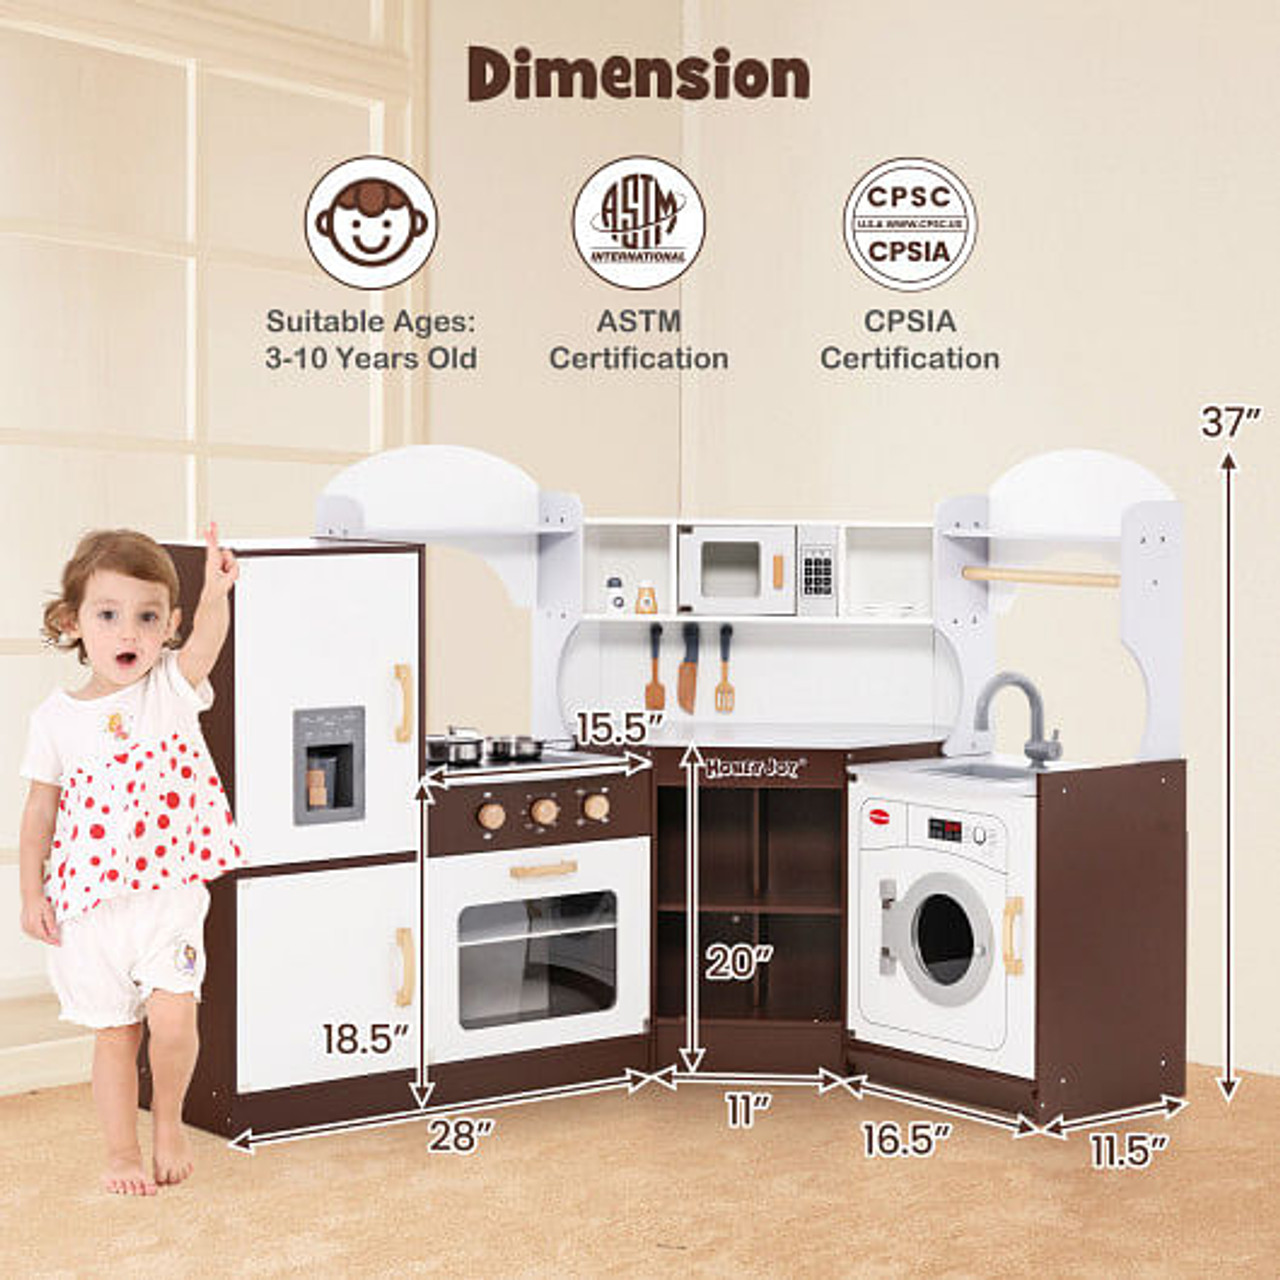 Toddler Kitchen Playset with Ice Maker Microwave Oven Sink and Washing Machine for Kids 3+ Years Old